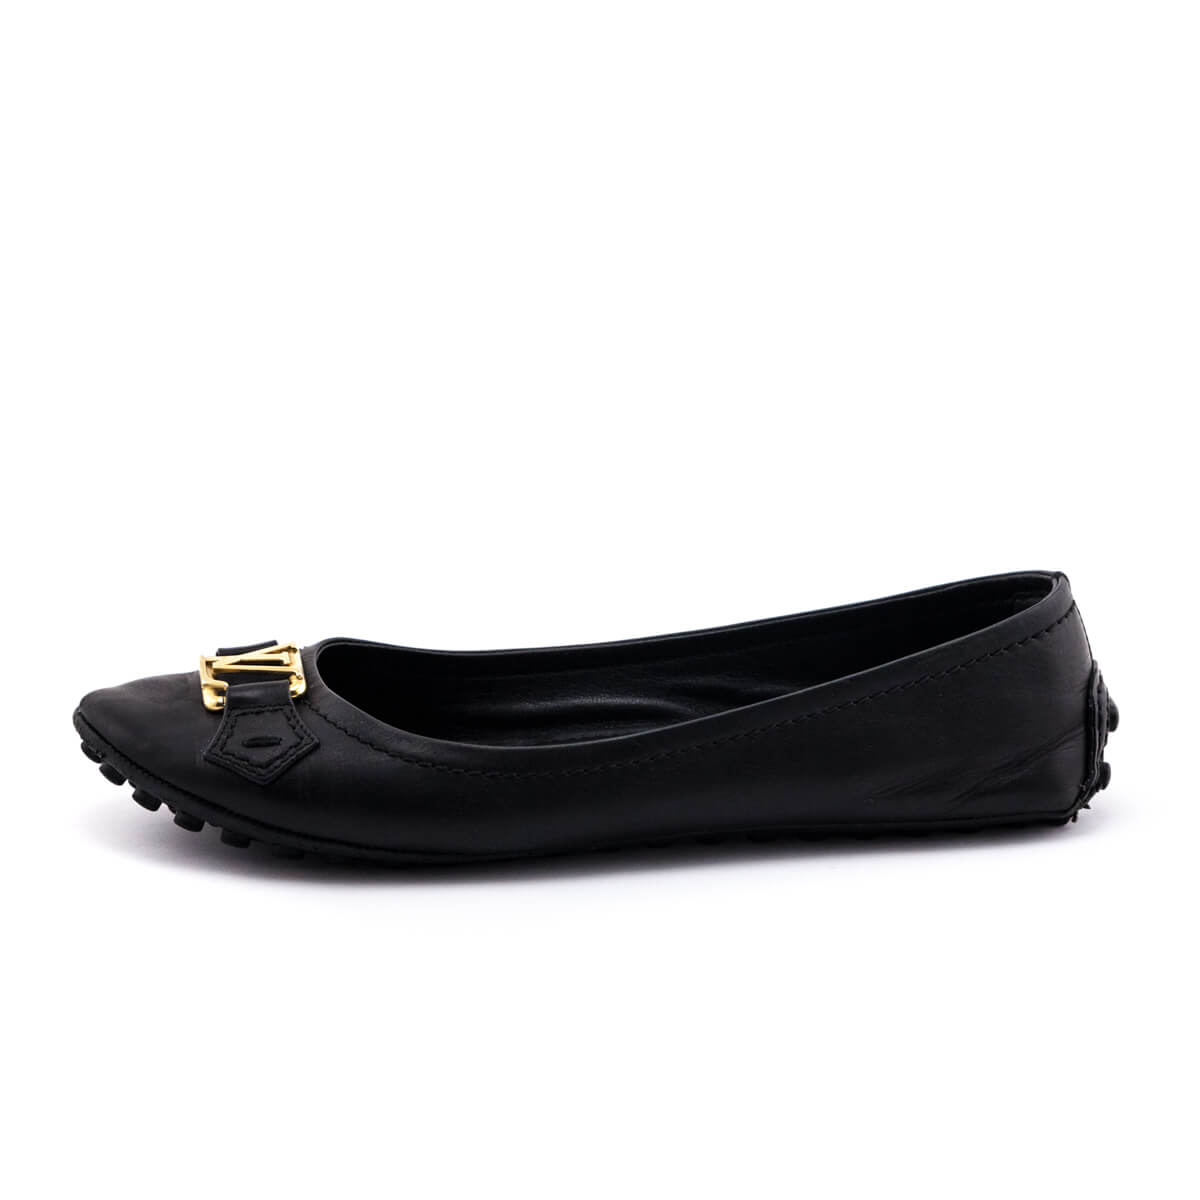 Voltaire leather flats Louis Vuitton Black size 7 US in Leather - 29282641